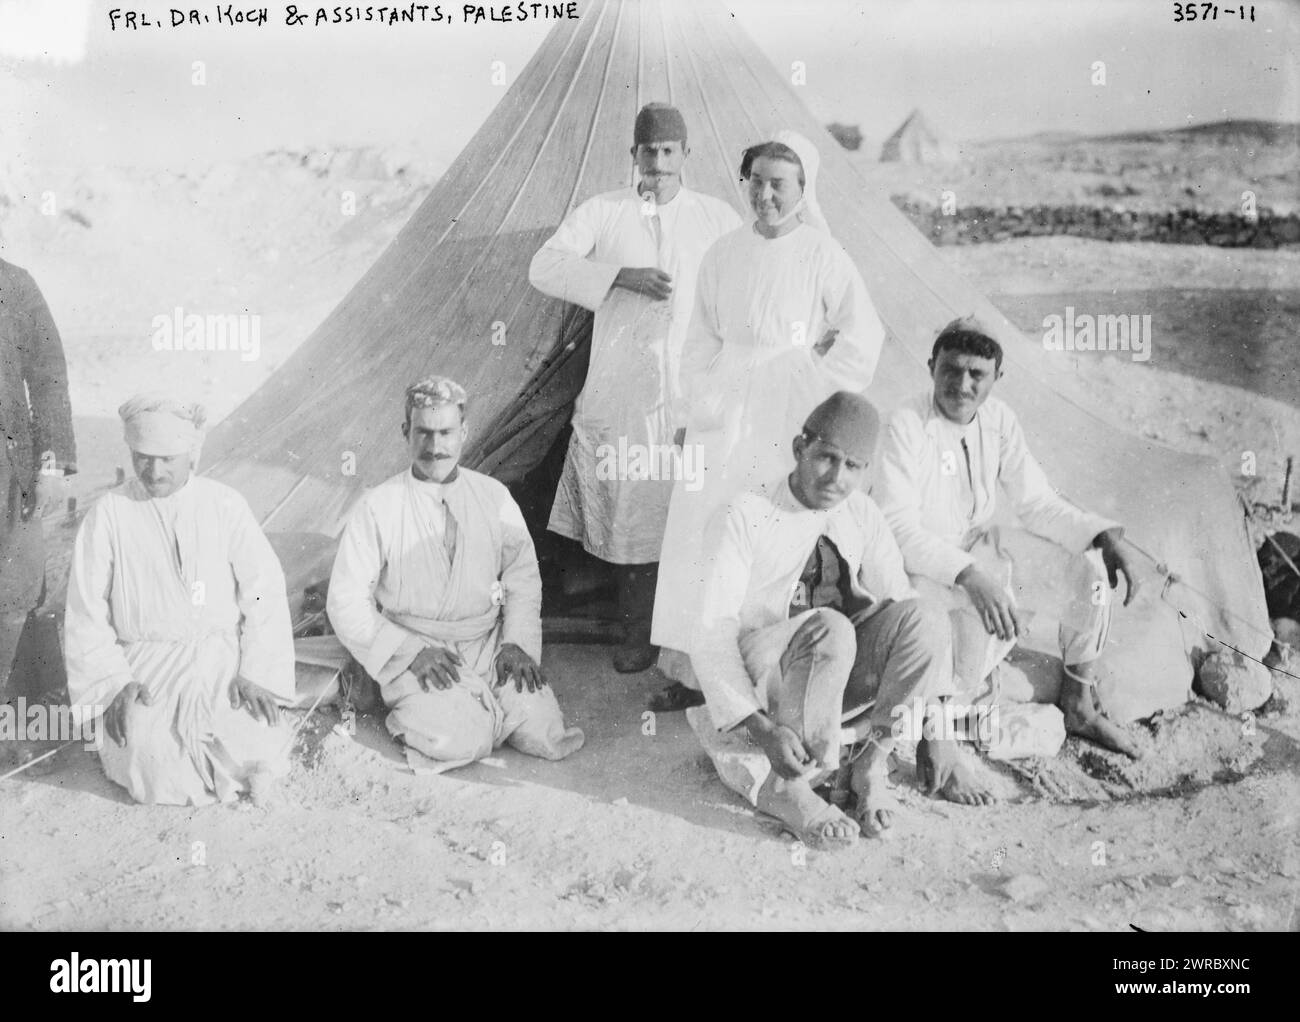 Frl. i.e. Fraulein Dr. Koch & Assistants, Palestine, Photograph shows Dr. Koch with her medical staff outside a tent in Palestine during World War I., between 1914 and ca. 1915, World War, 1914-1918, Glass negatives, 1 negative: glass Stock Photo